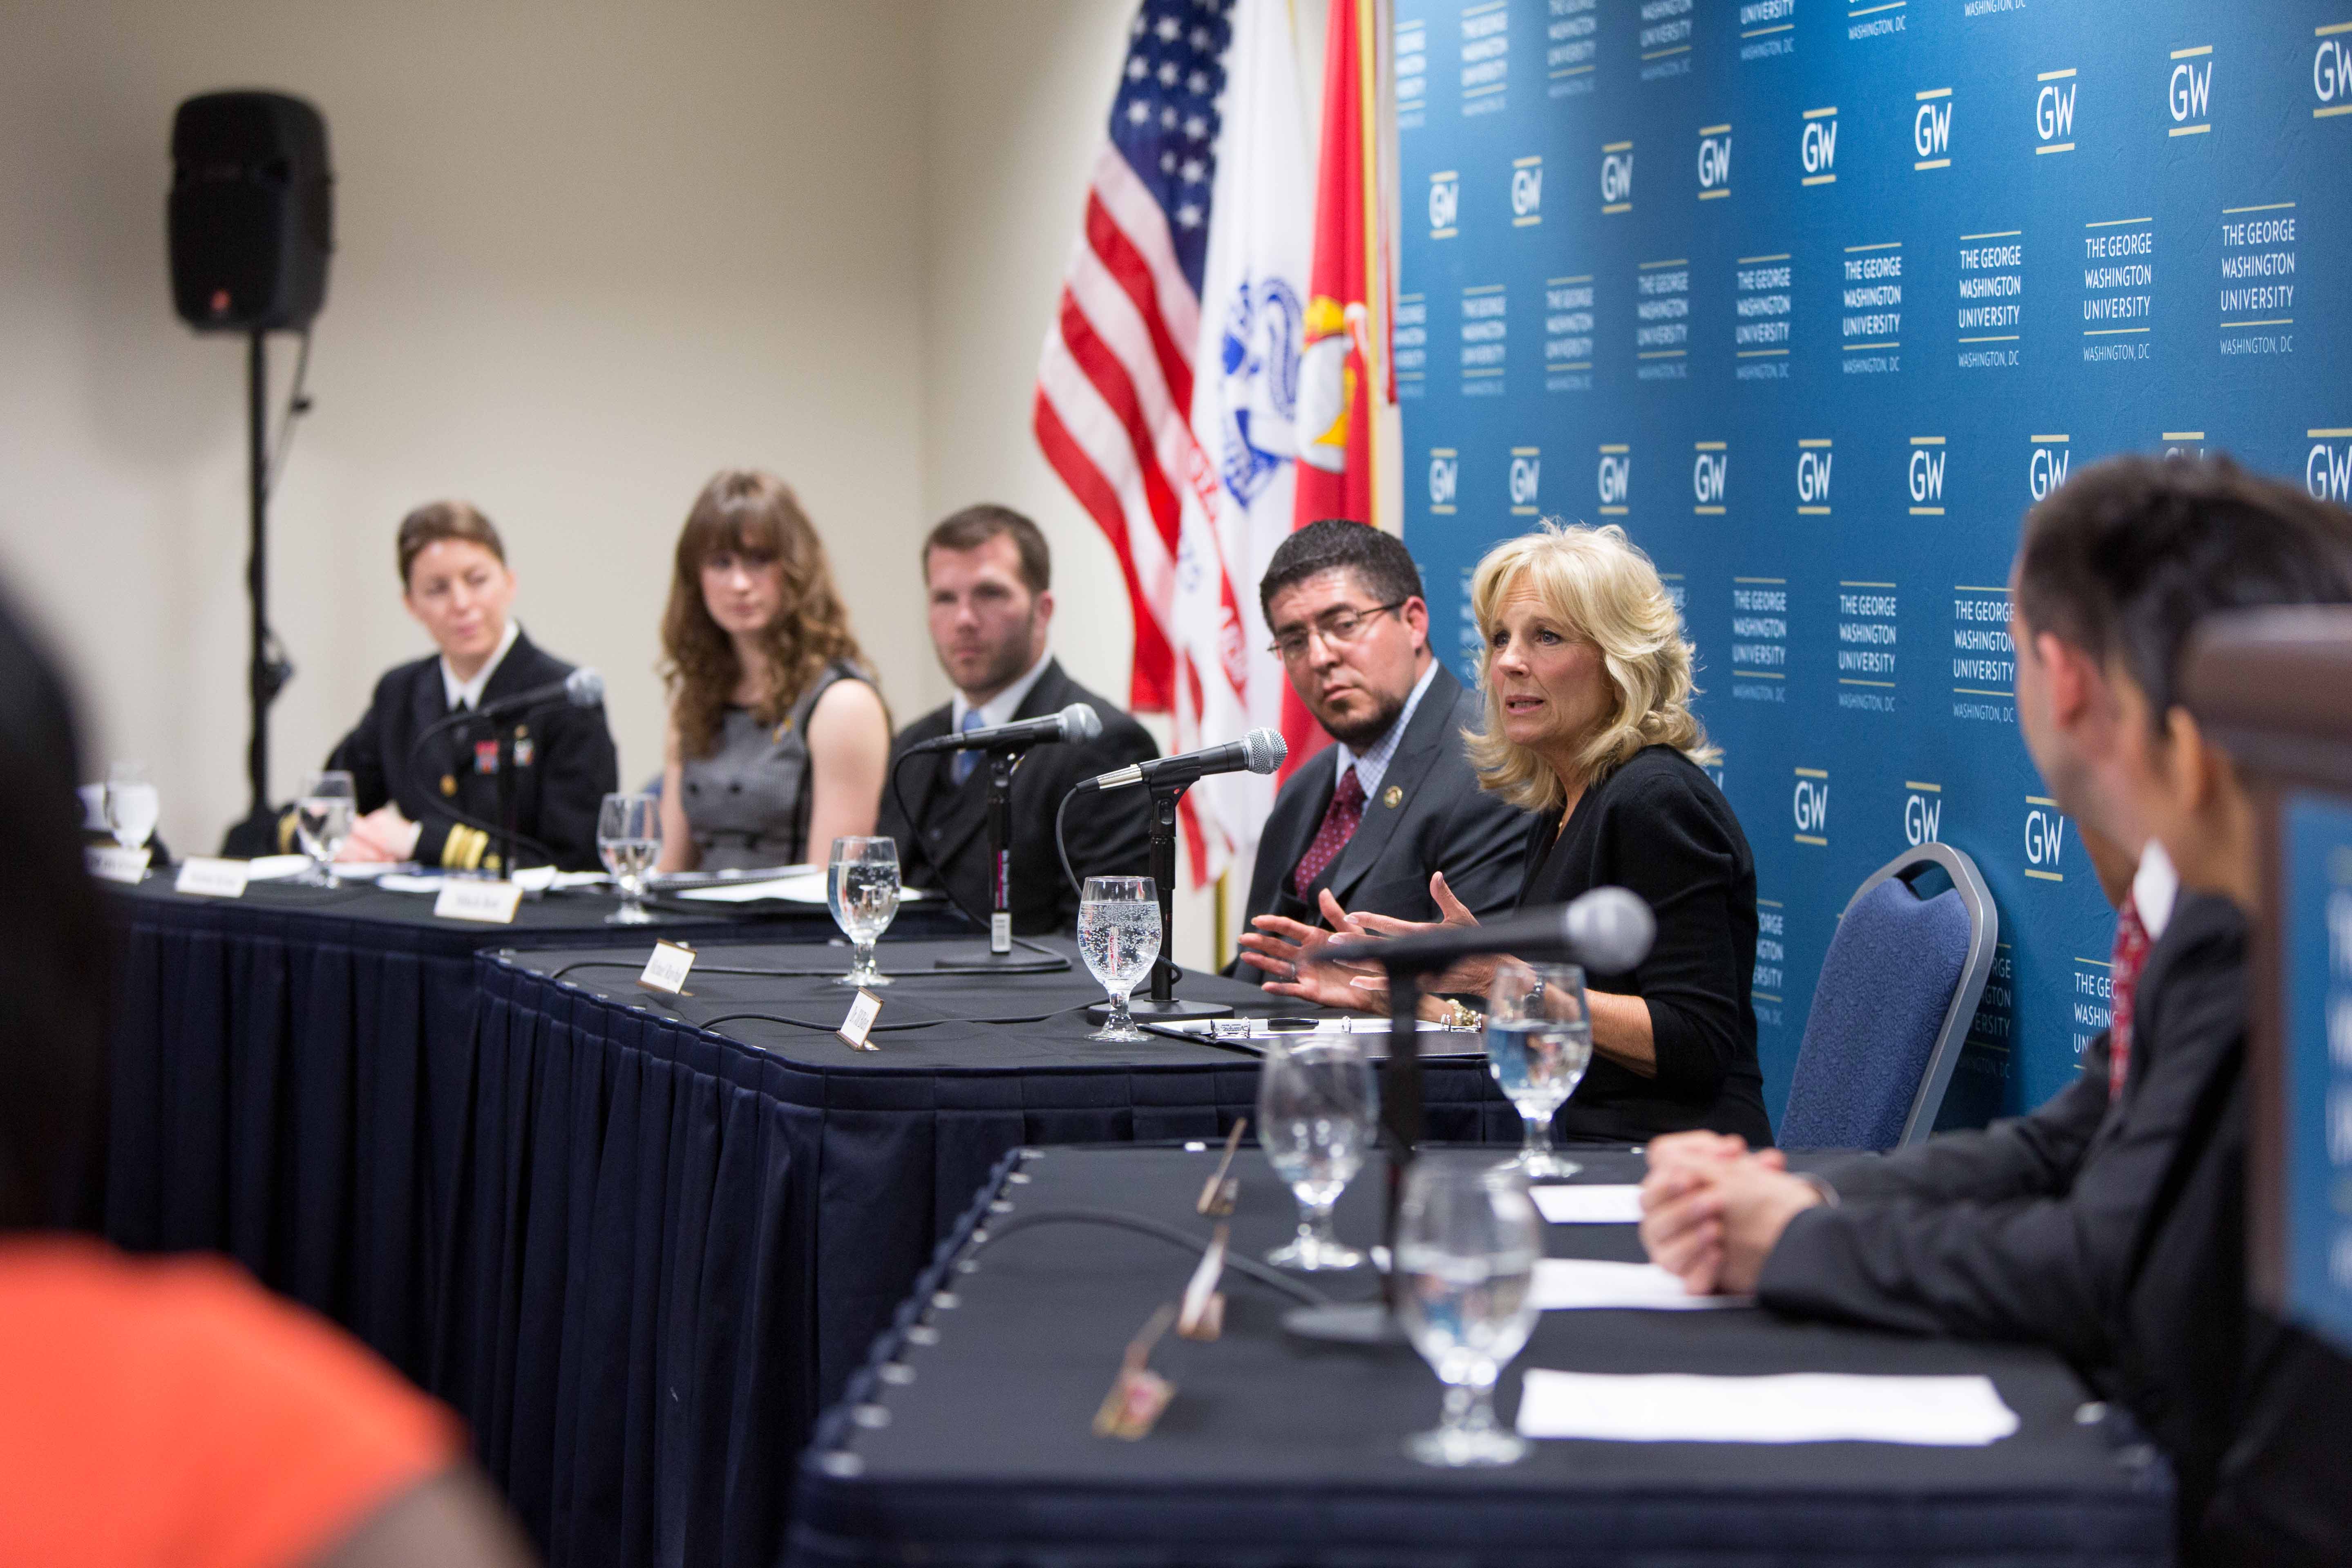 Dr. Biden participates on a panel with student, faculty and staff veterans at George Washington University